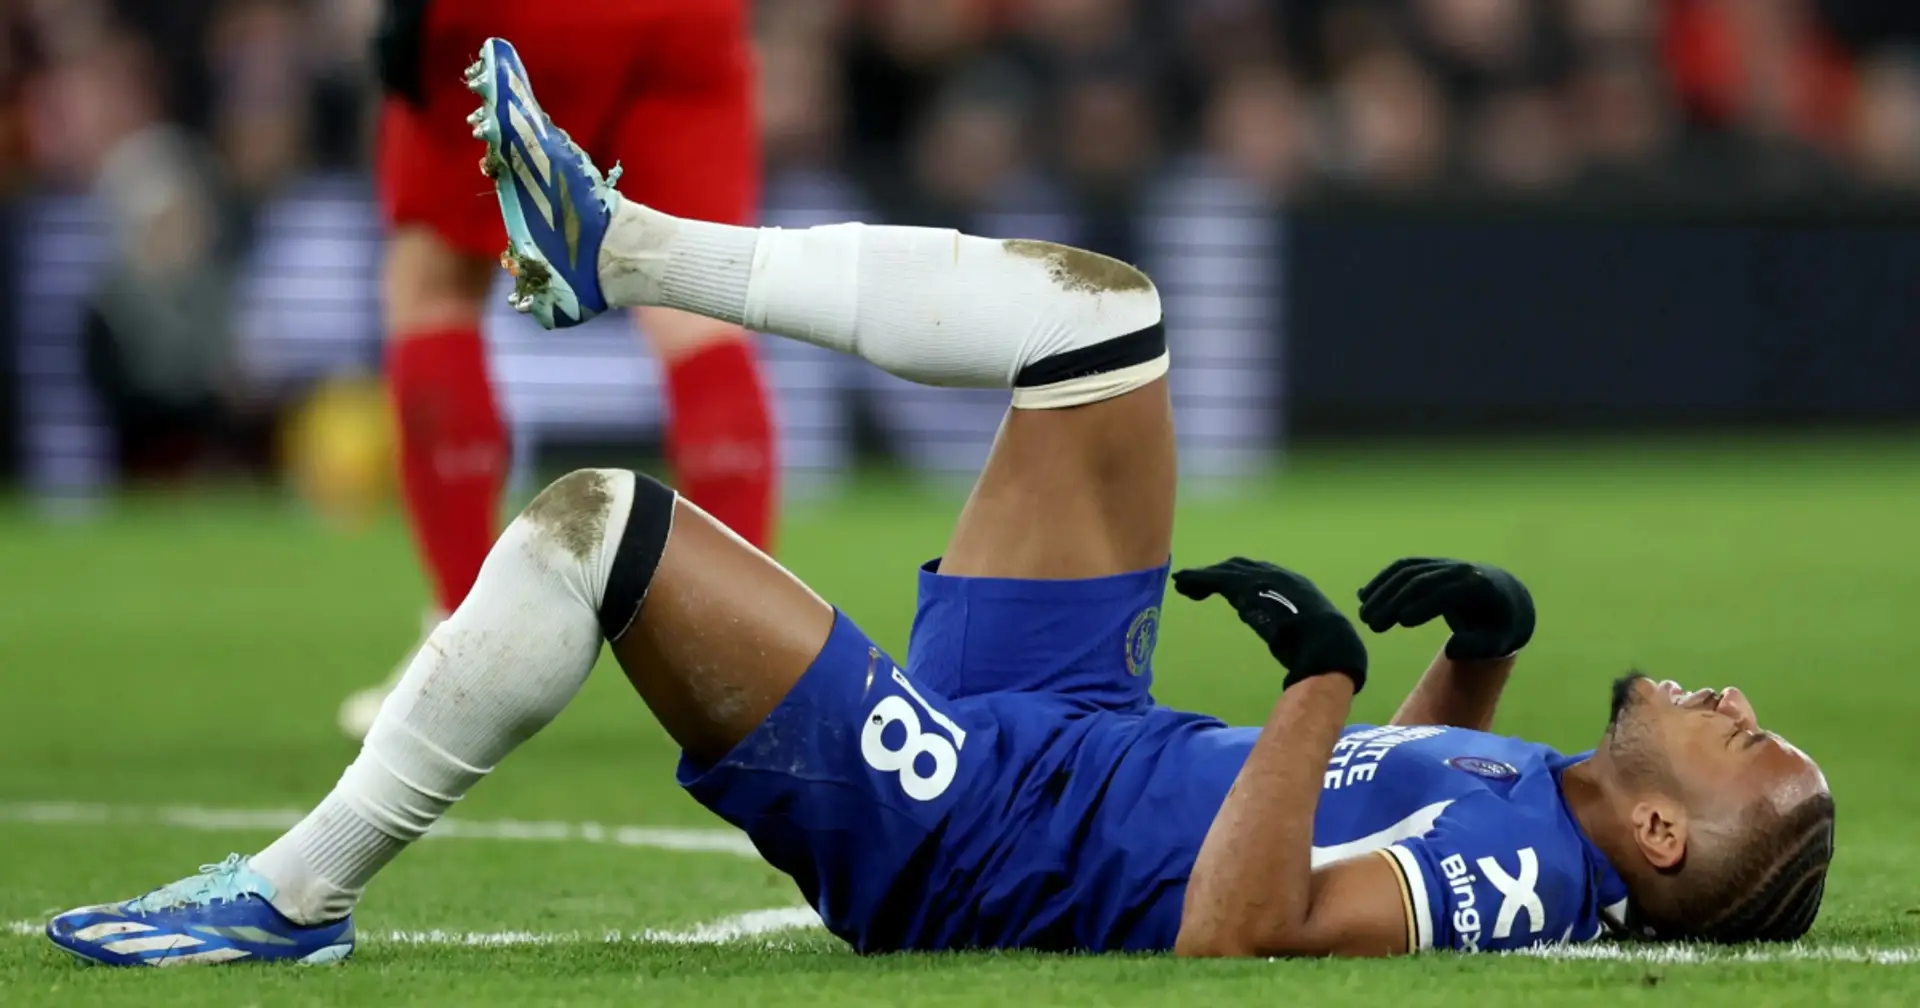 Chelsea players 'targeted by private sports medicine experts' amid injury crisis